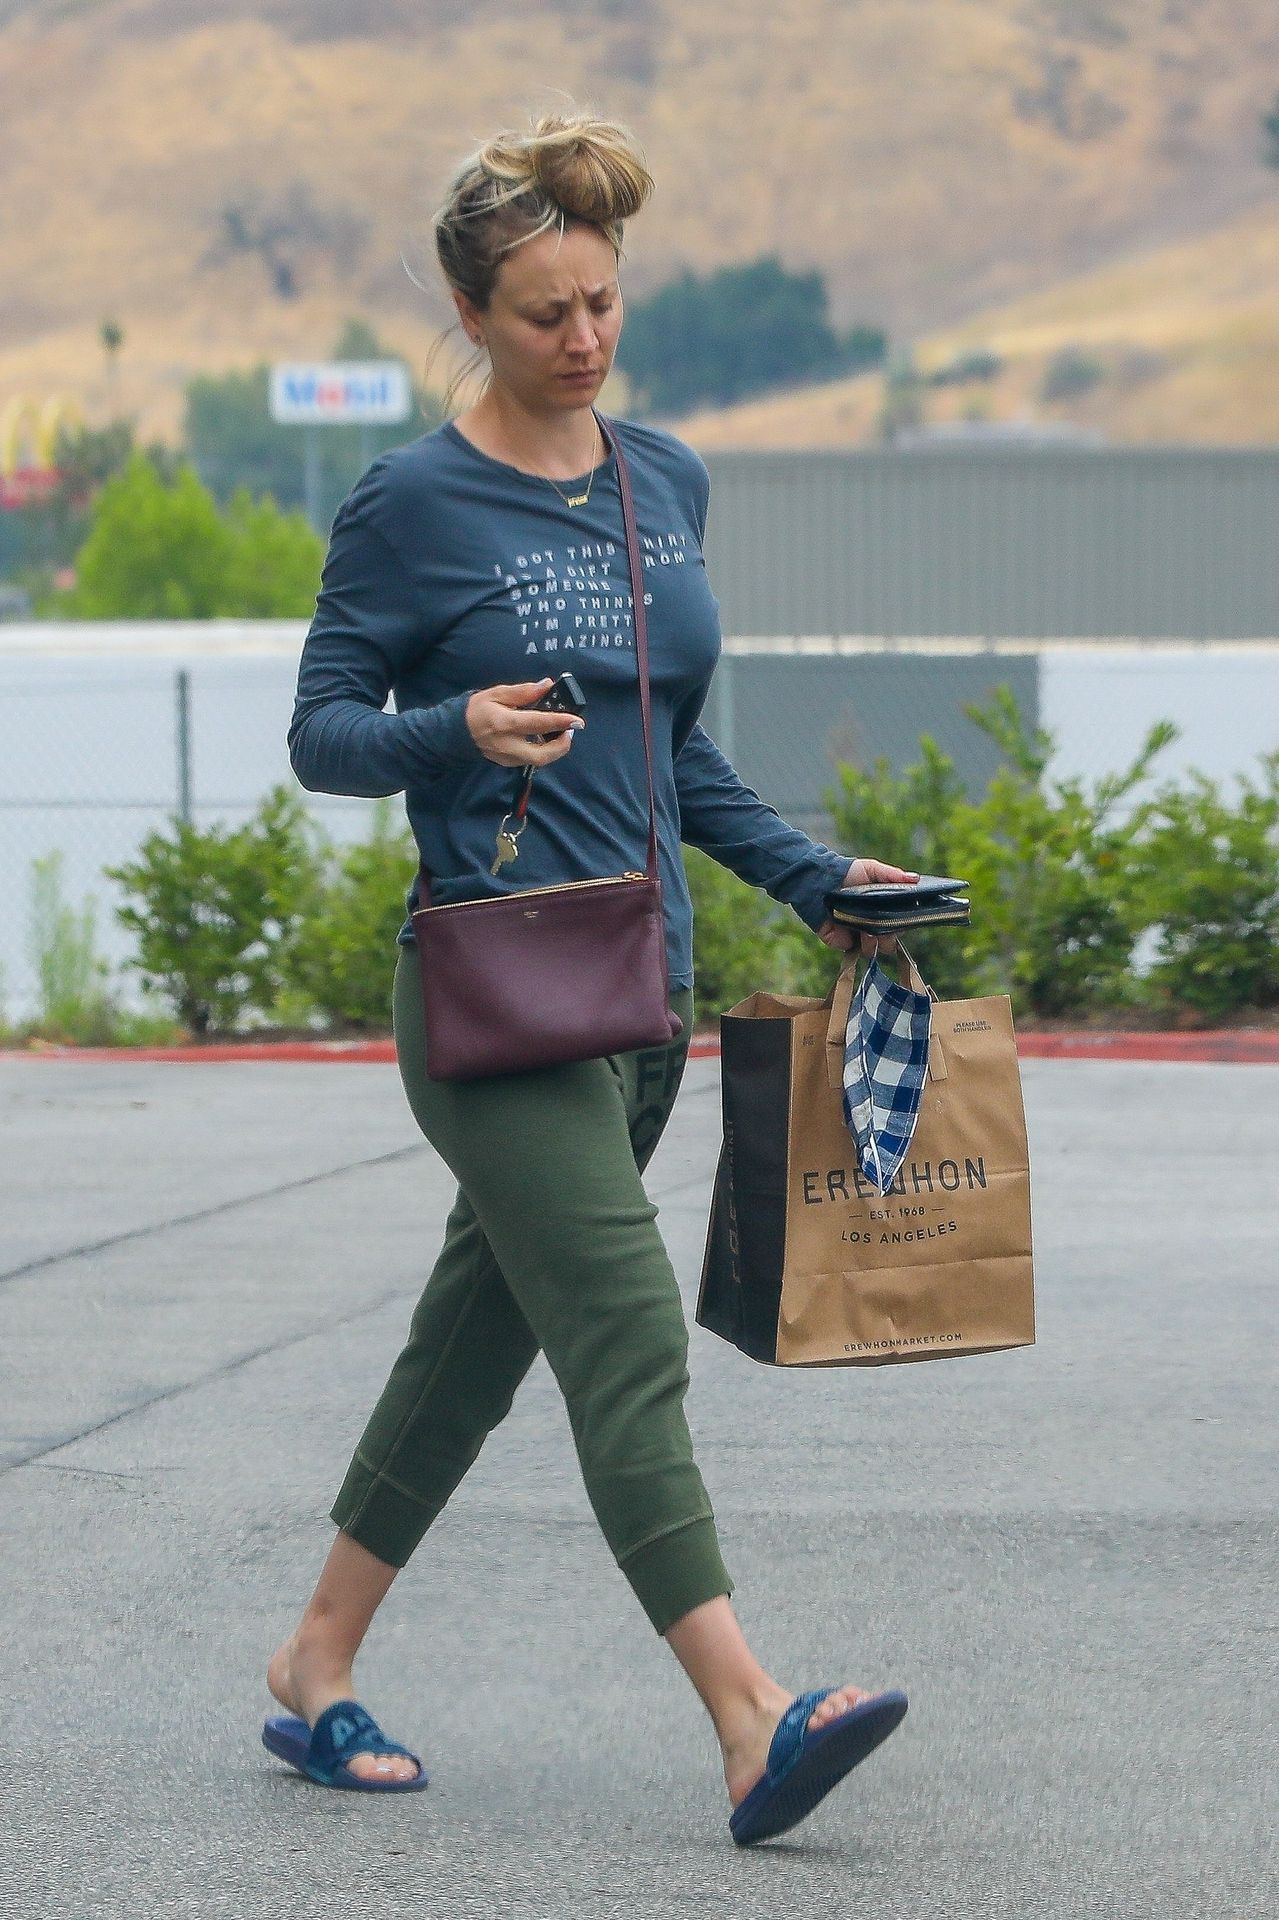 Kaley Cuoco Appears to Have a Bad Hair Day While Grocery Shopping (19 Photos)